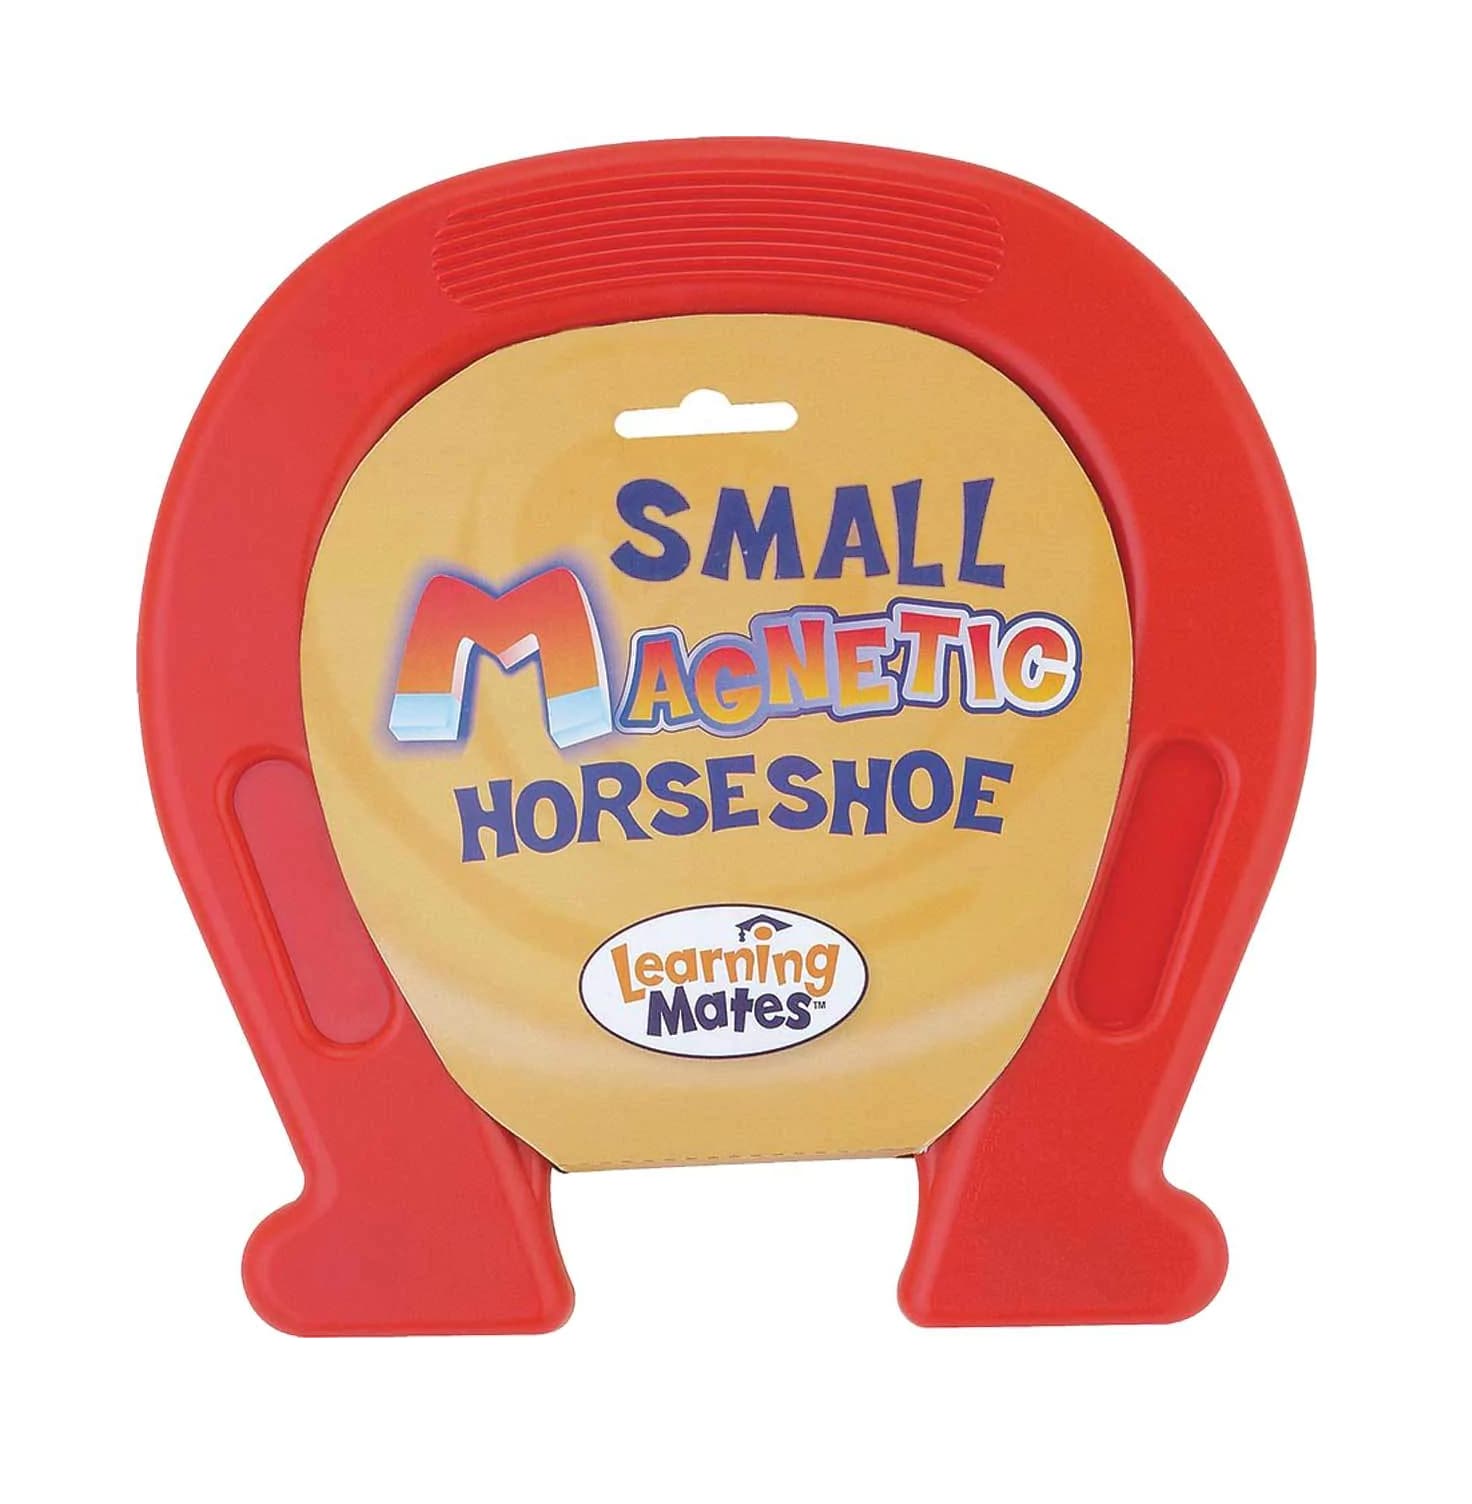 Small Magnetic Horseshoe red